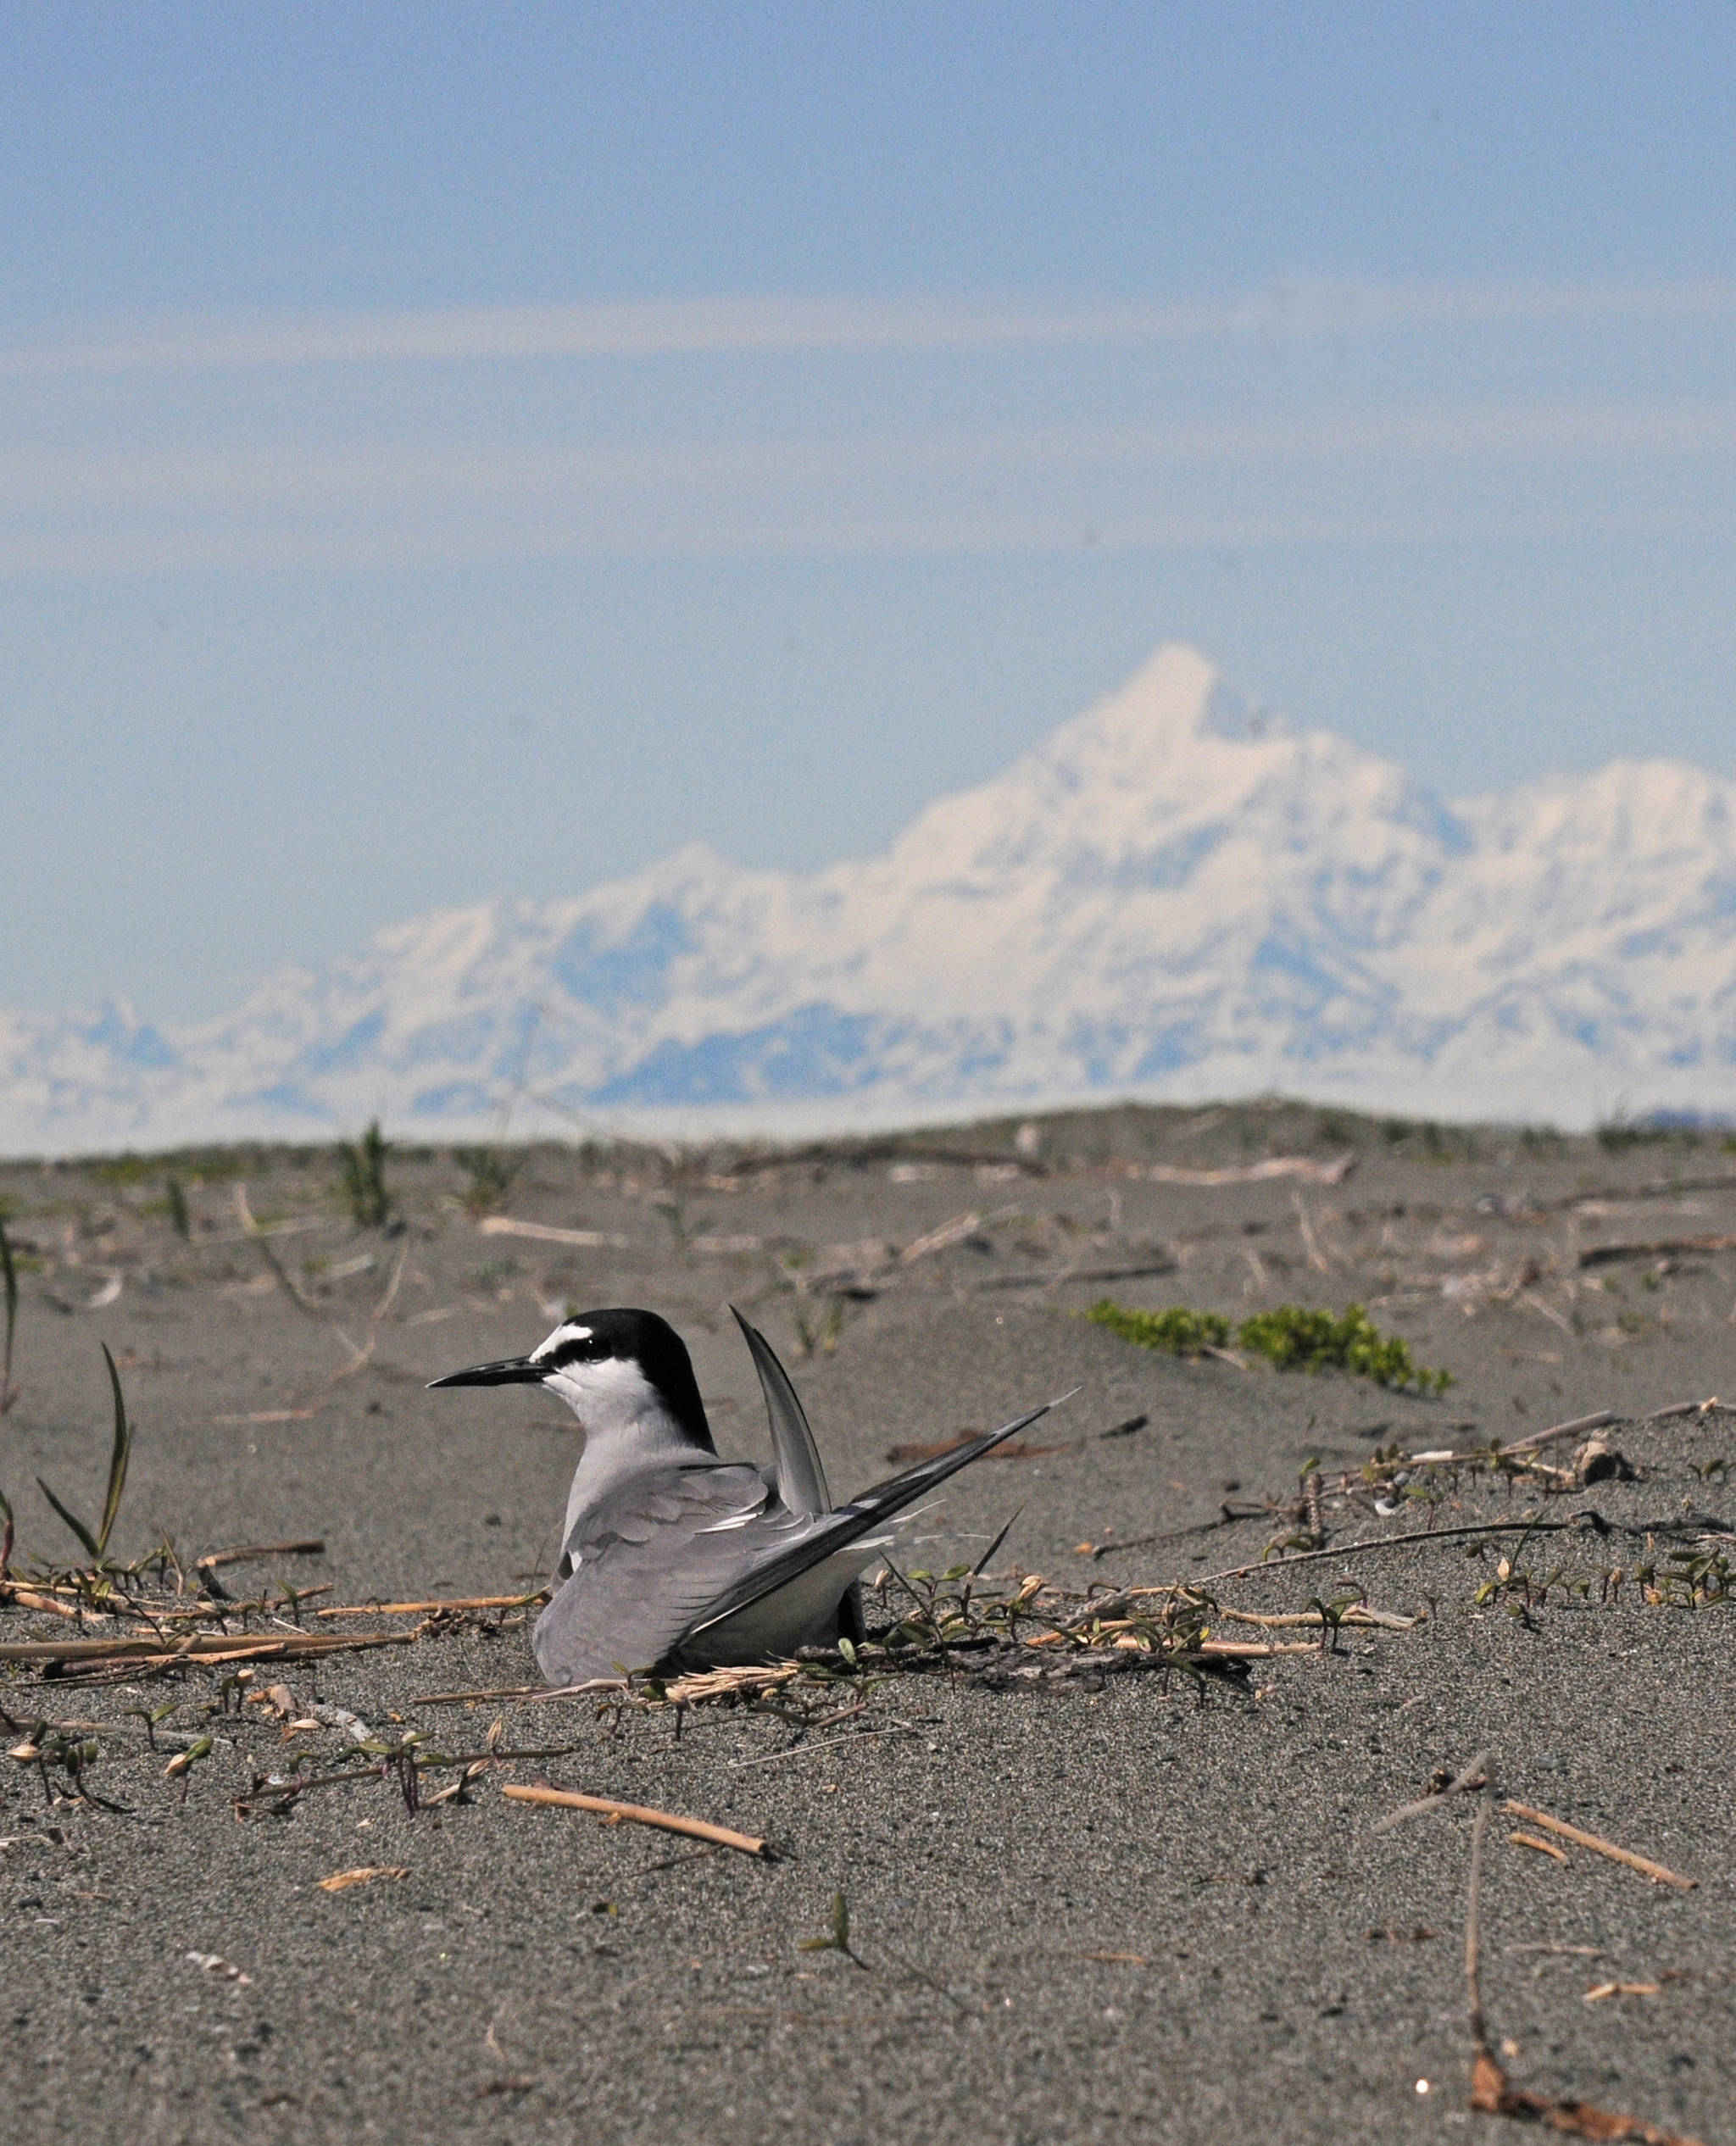 An Aleutian tern sits on its nest, with Mount St. Elias in the background. (Bob Armstrong | For the Juneau Empire)